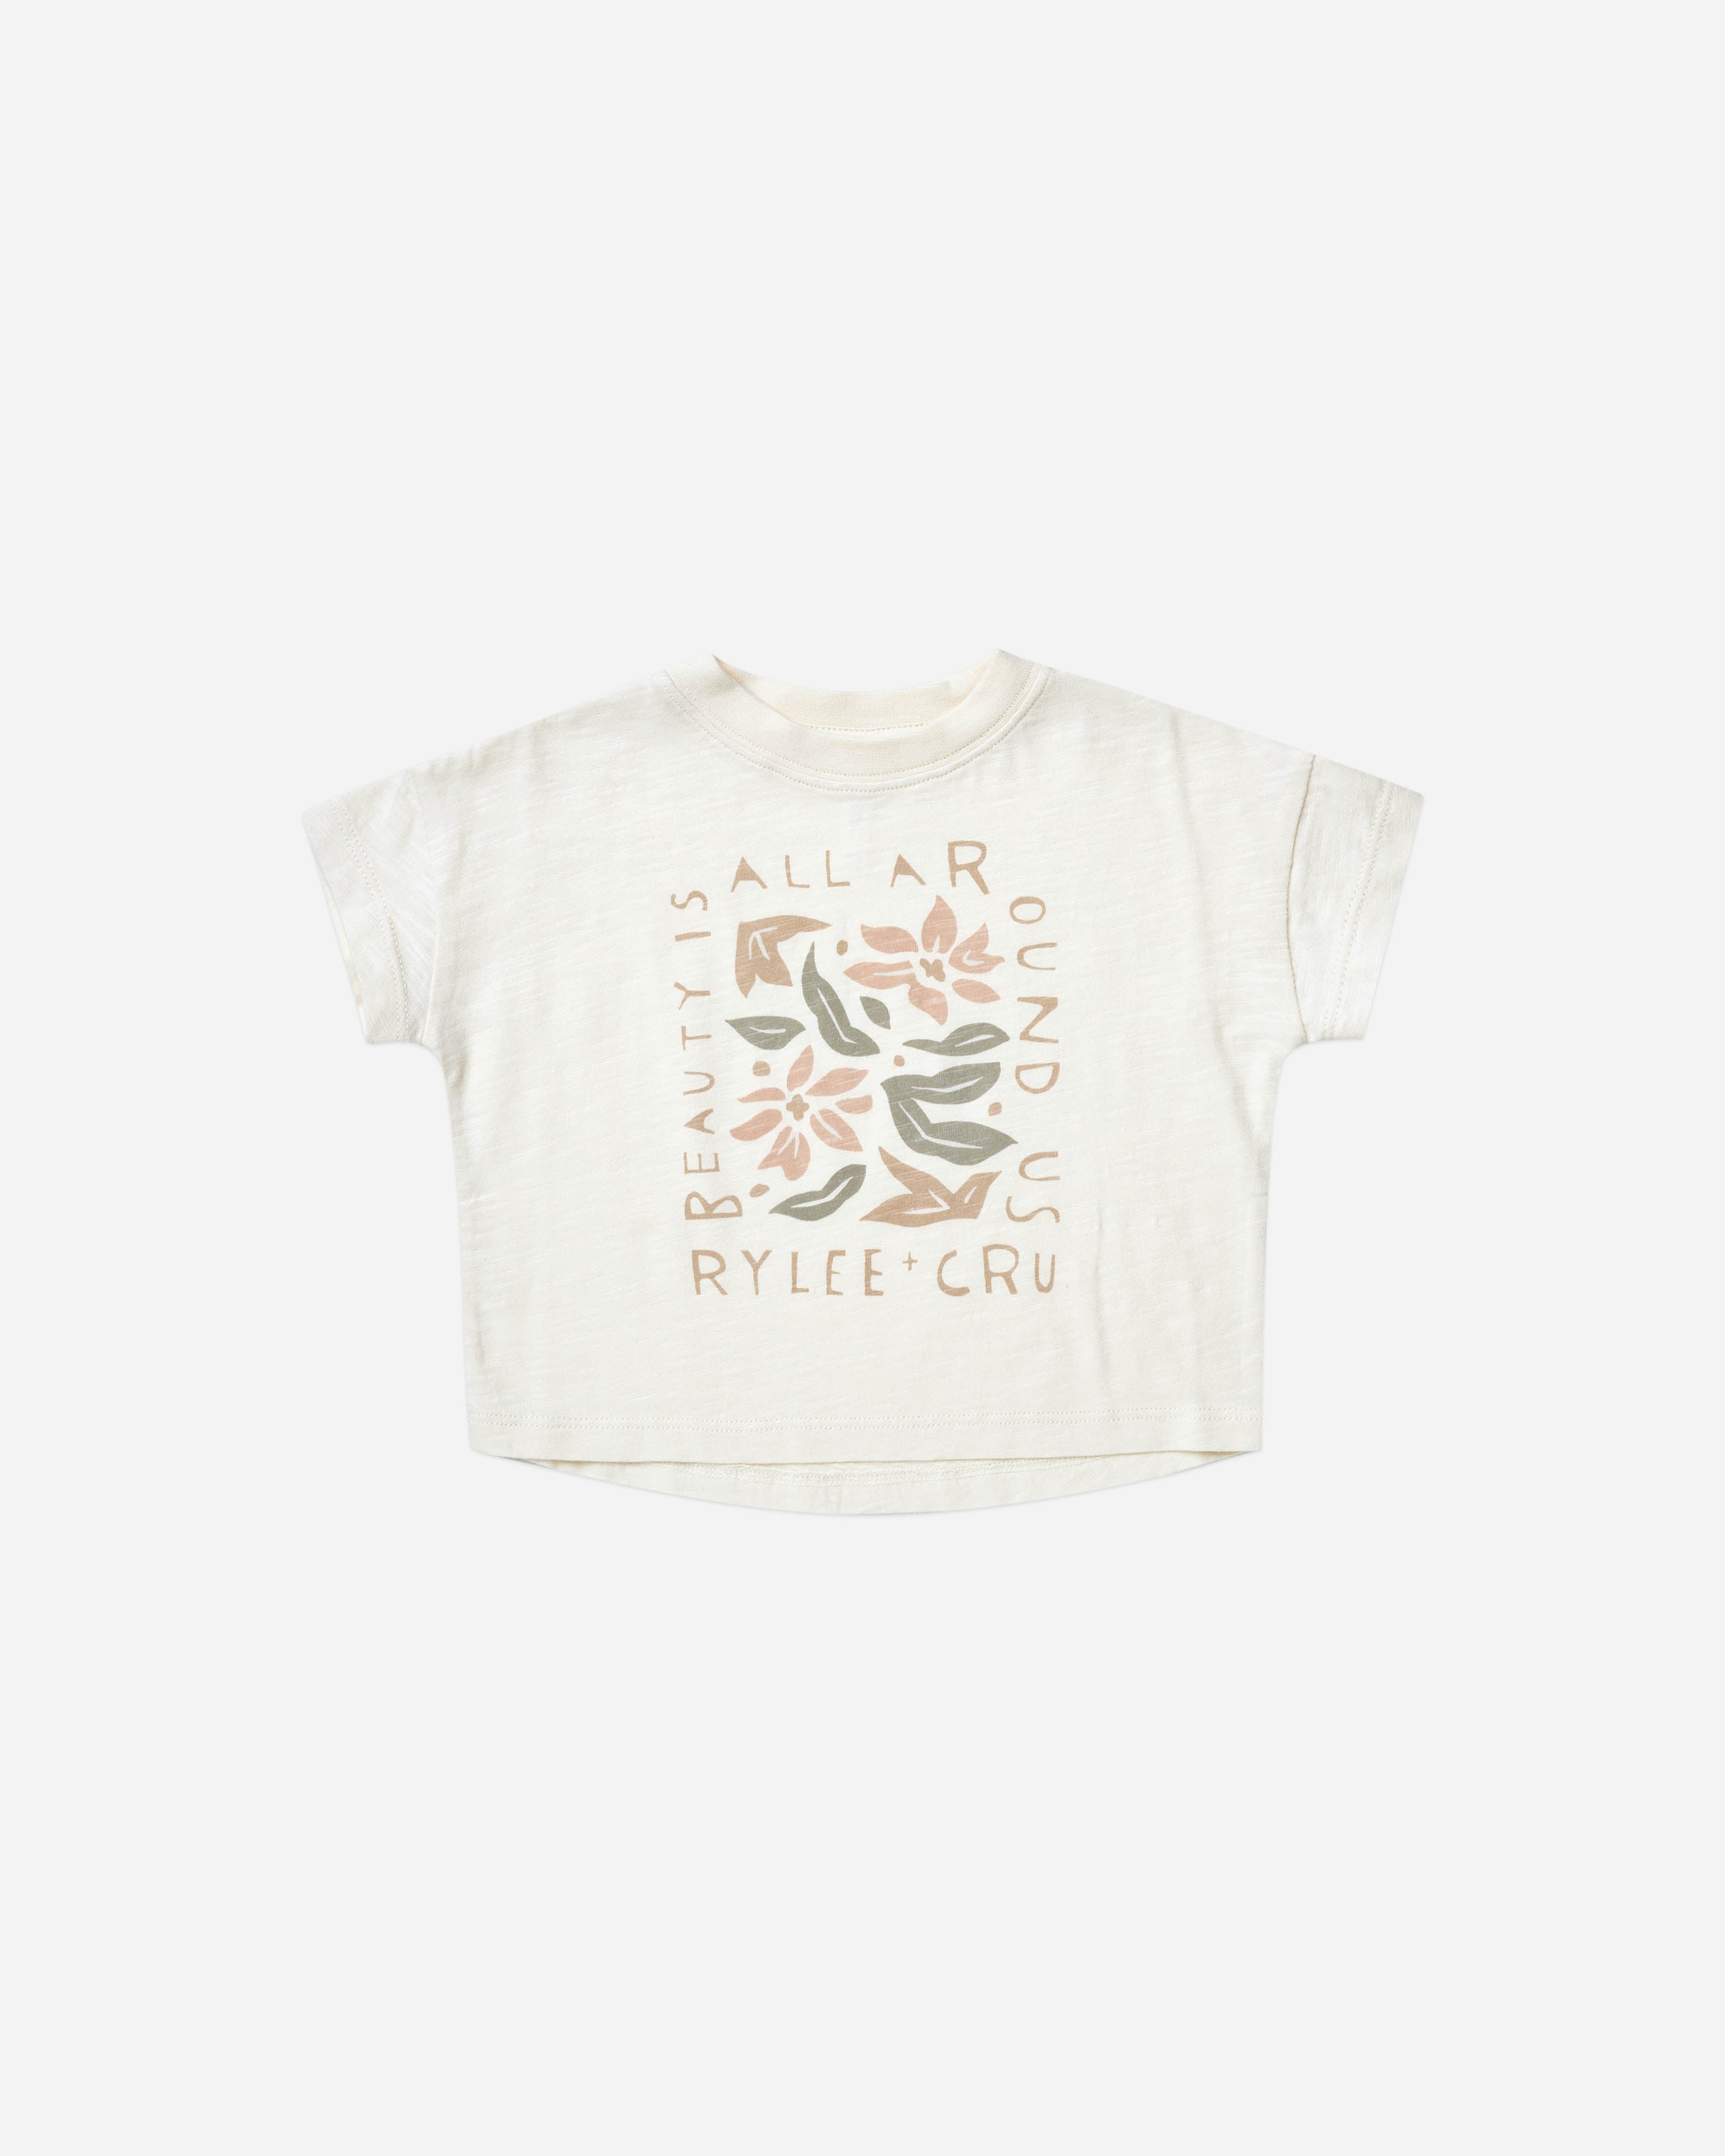 boxy tee || beauty - Rylee + Cru | Kids Clothes | Trendy Baby Clothes | Modern Infant Outfits |